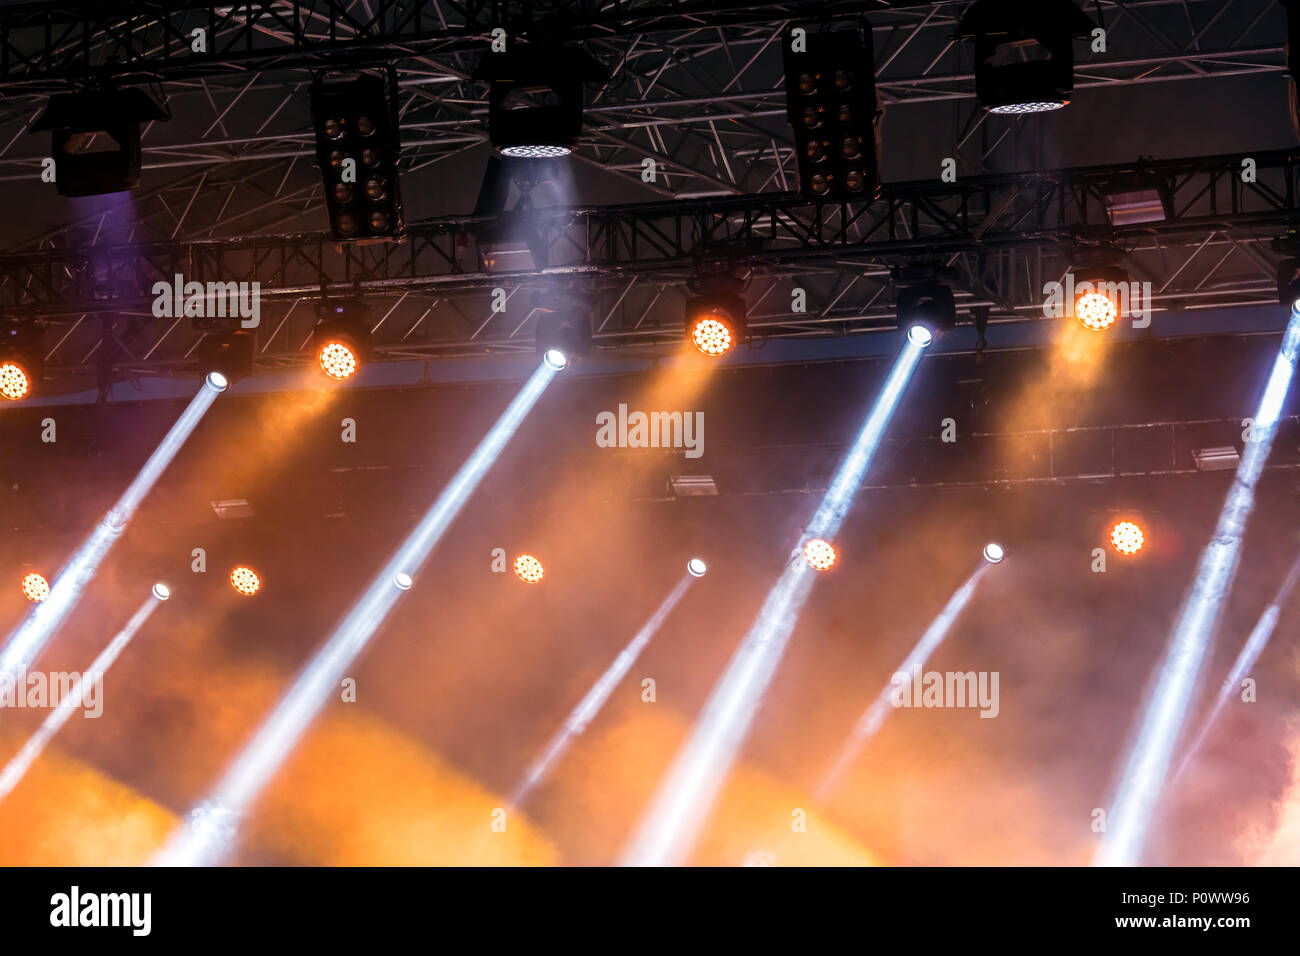 outdoor stage during performance with yellow spotlights and blue searchlights  Stock Photo